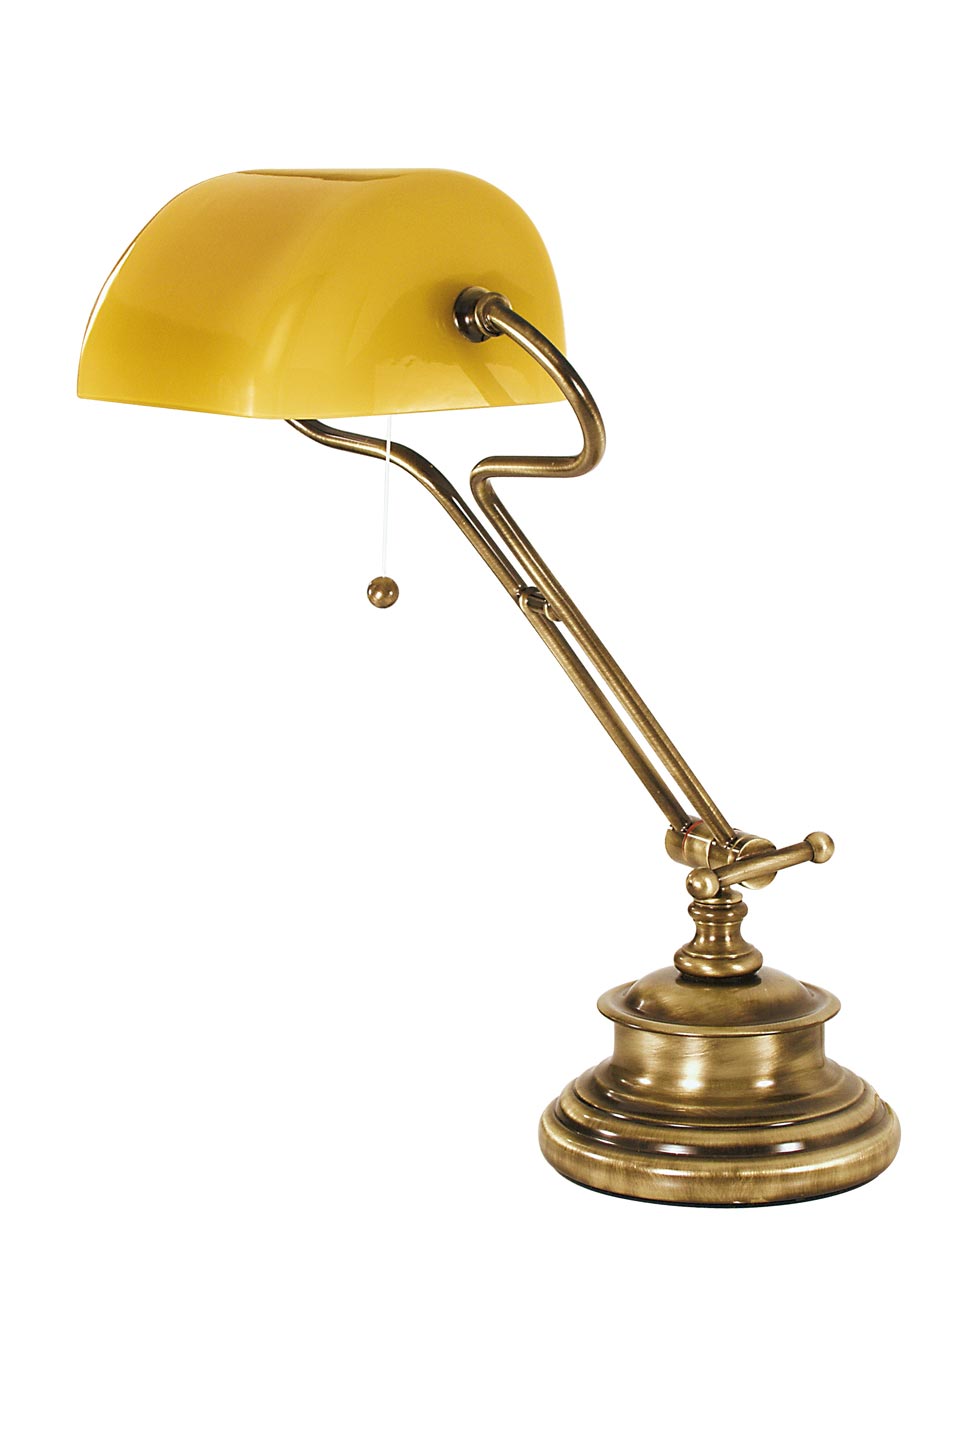 American yellow library lamp in natural brass. Moretti Luce. 